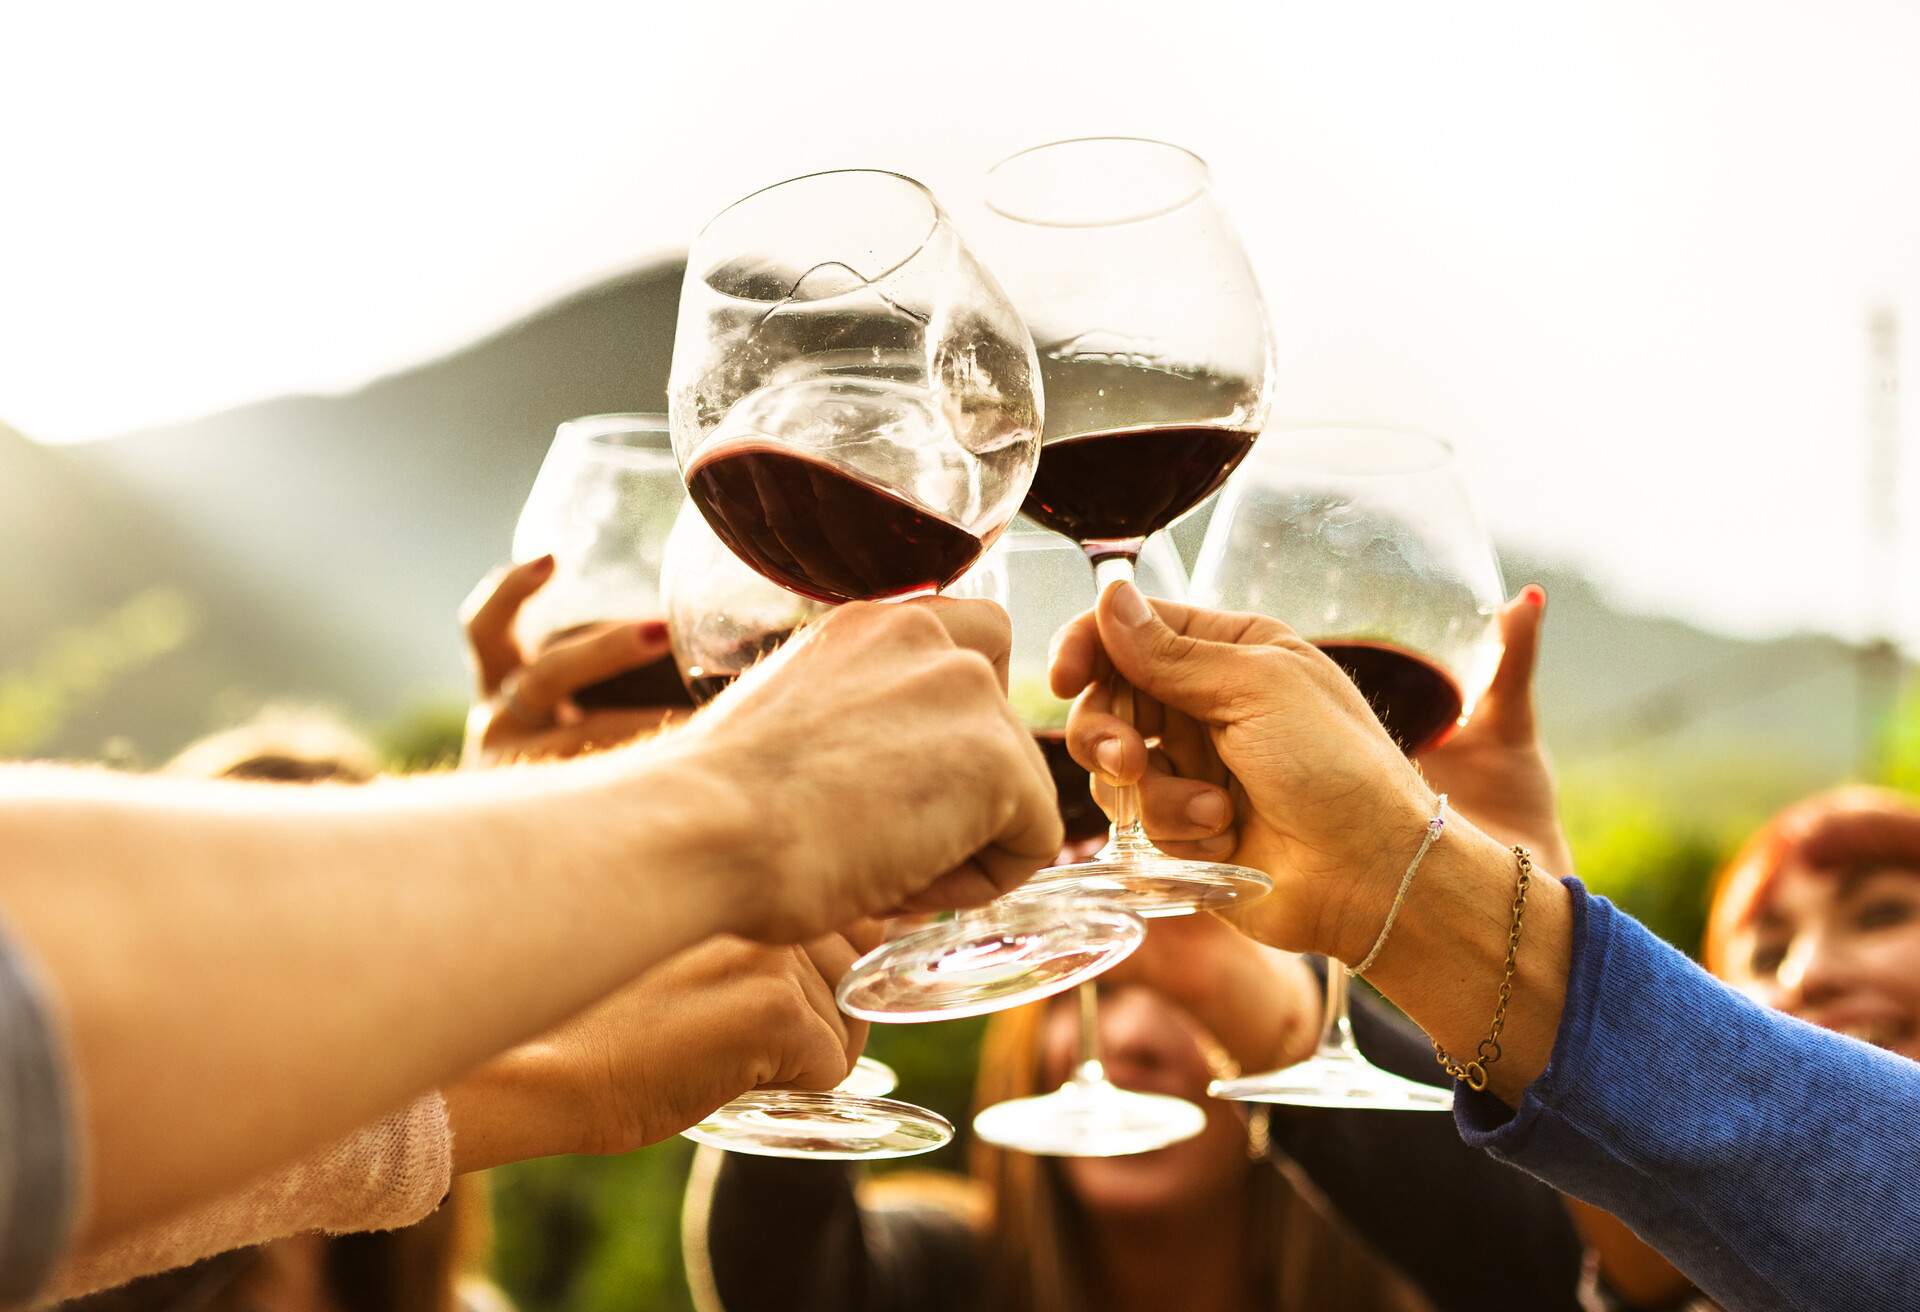 THEME_PEOPLE_CHEERING_WINE_GLASS_GettyImages-856736400